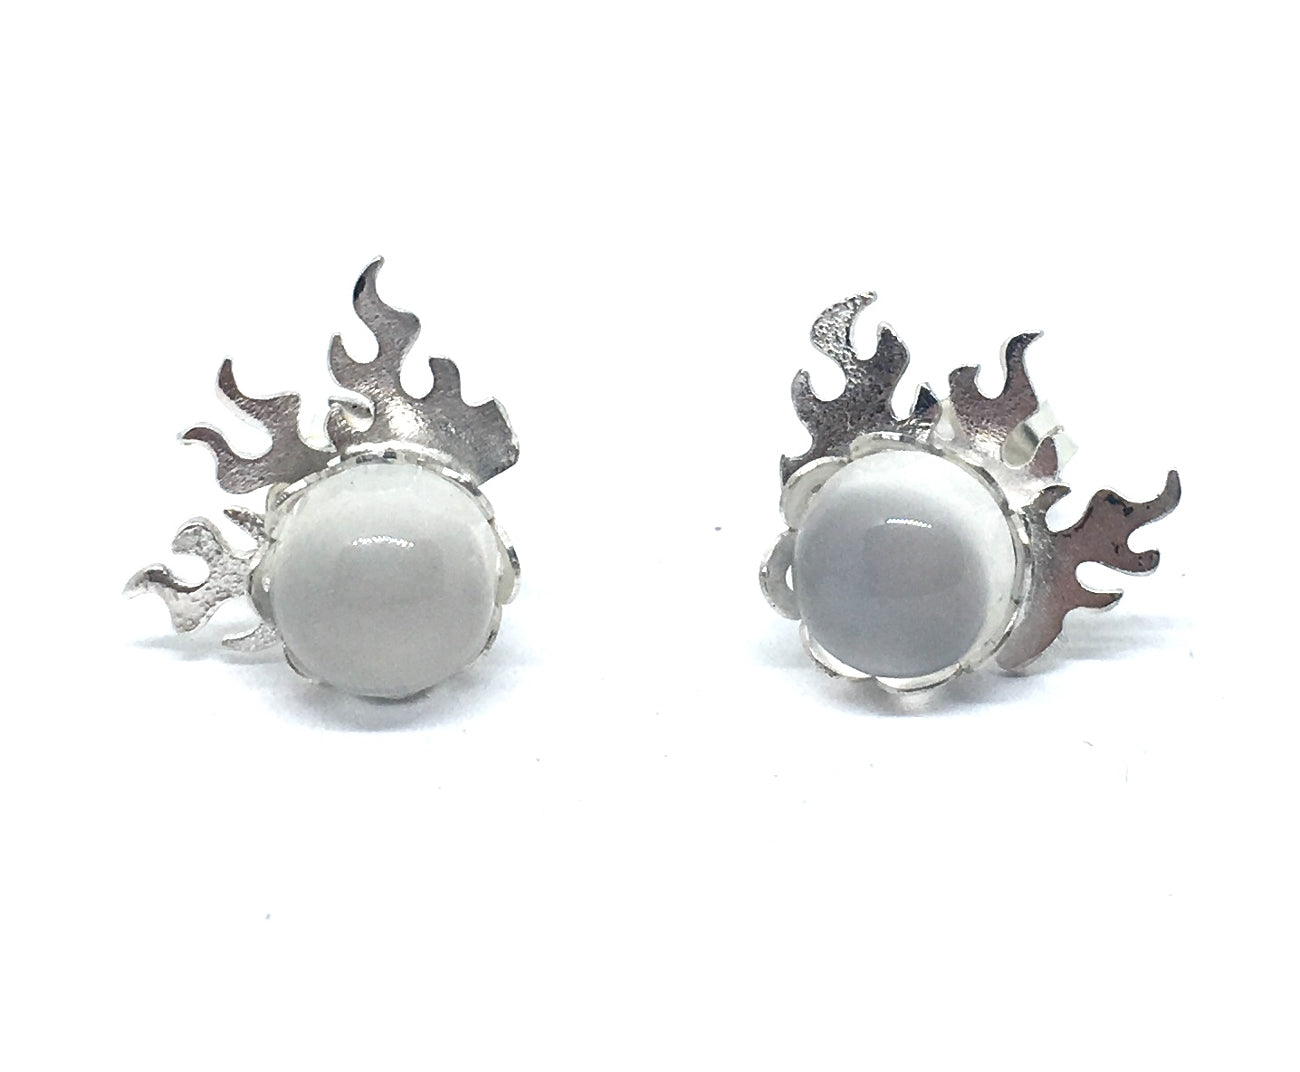 fire earrings with moonstones in sterling silver